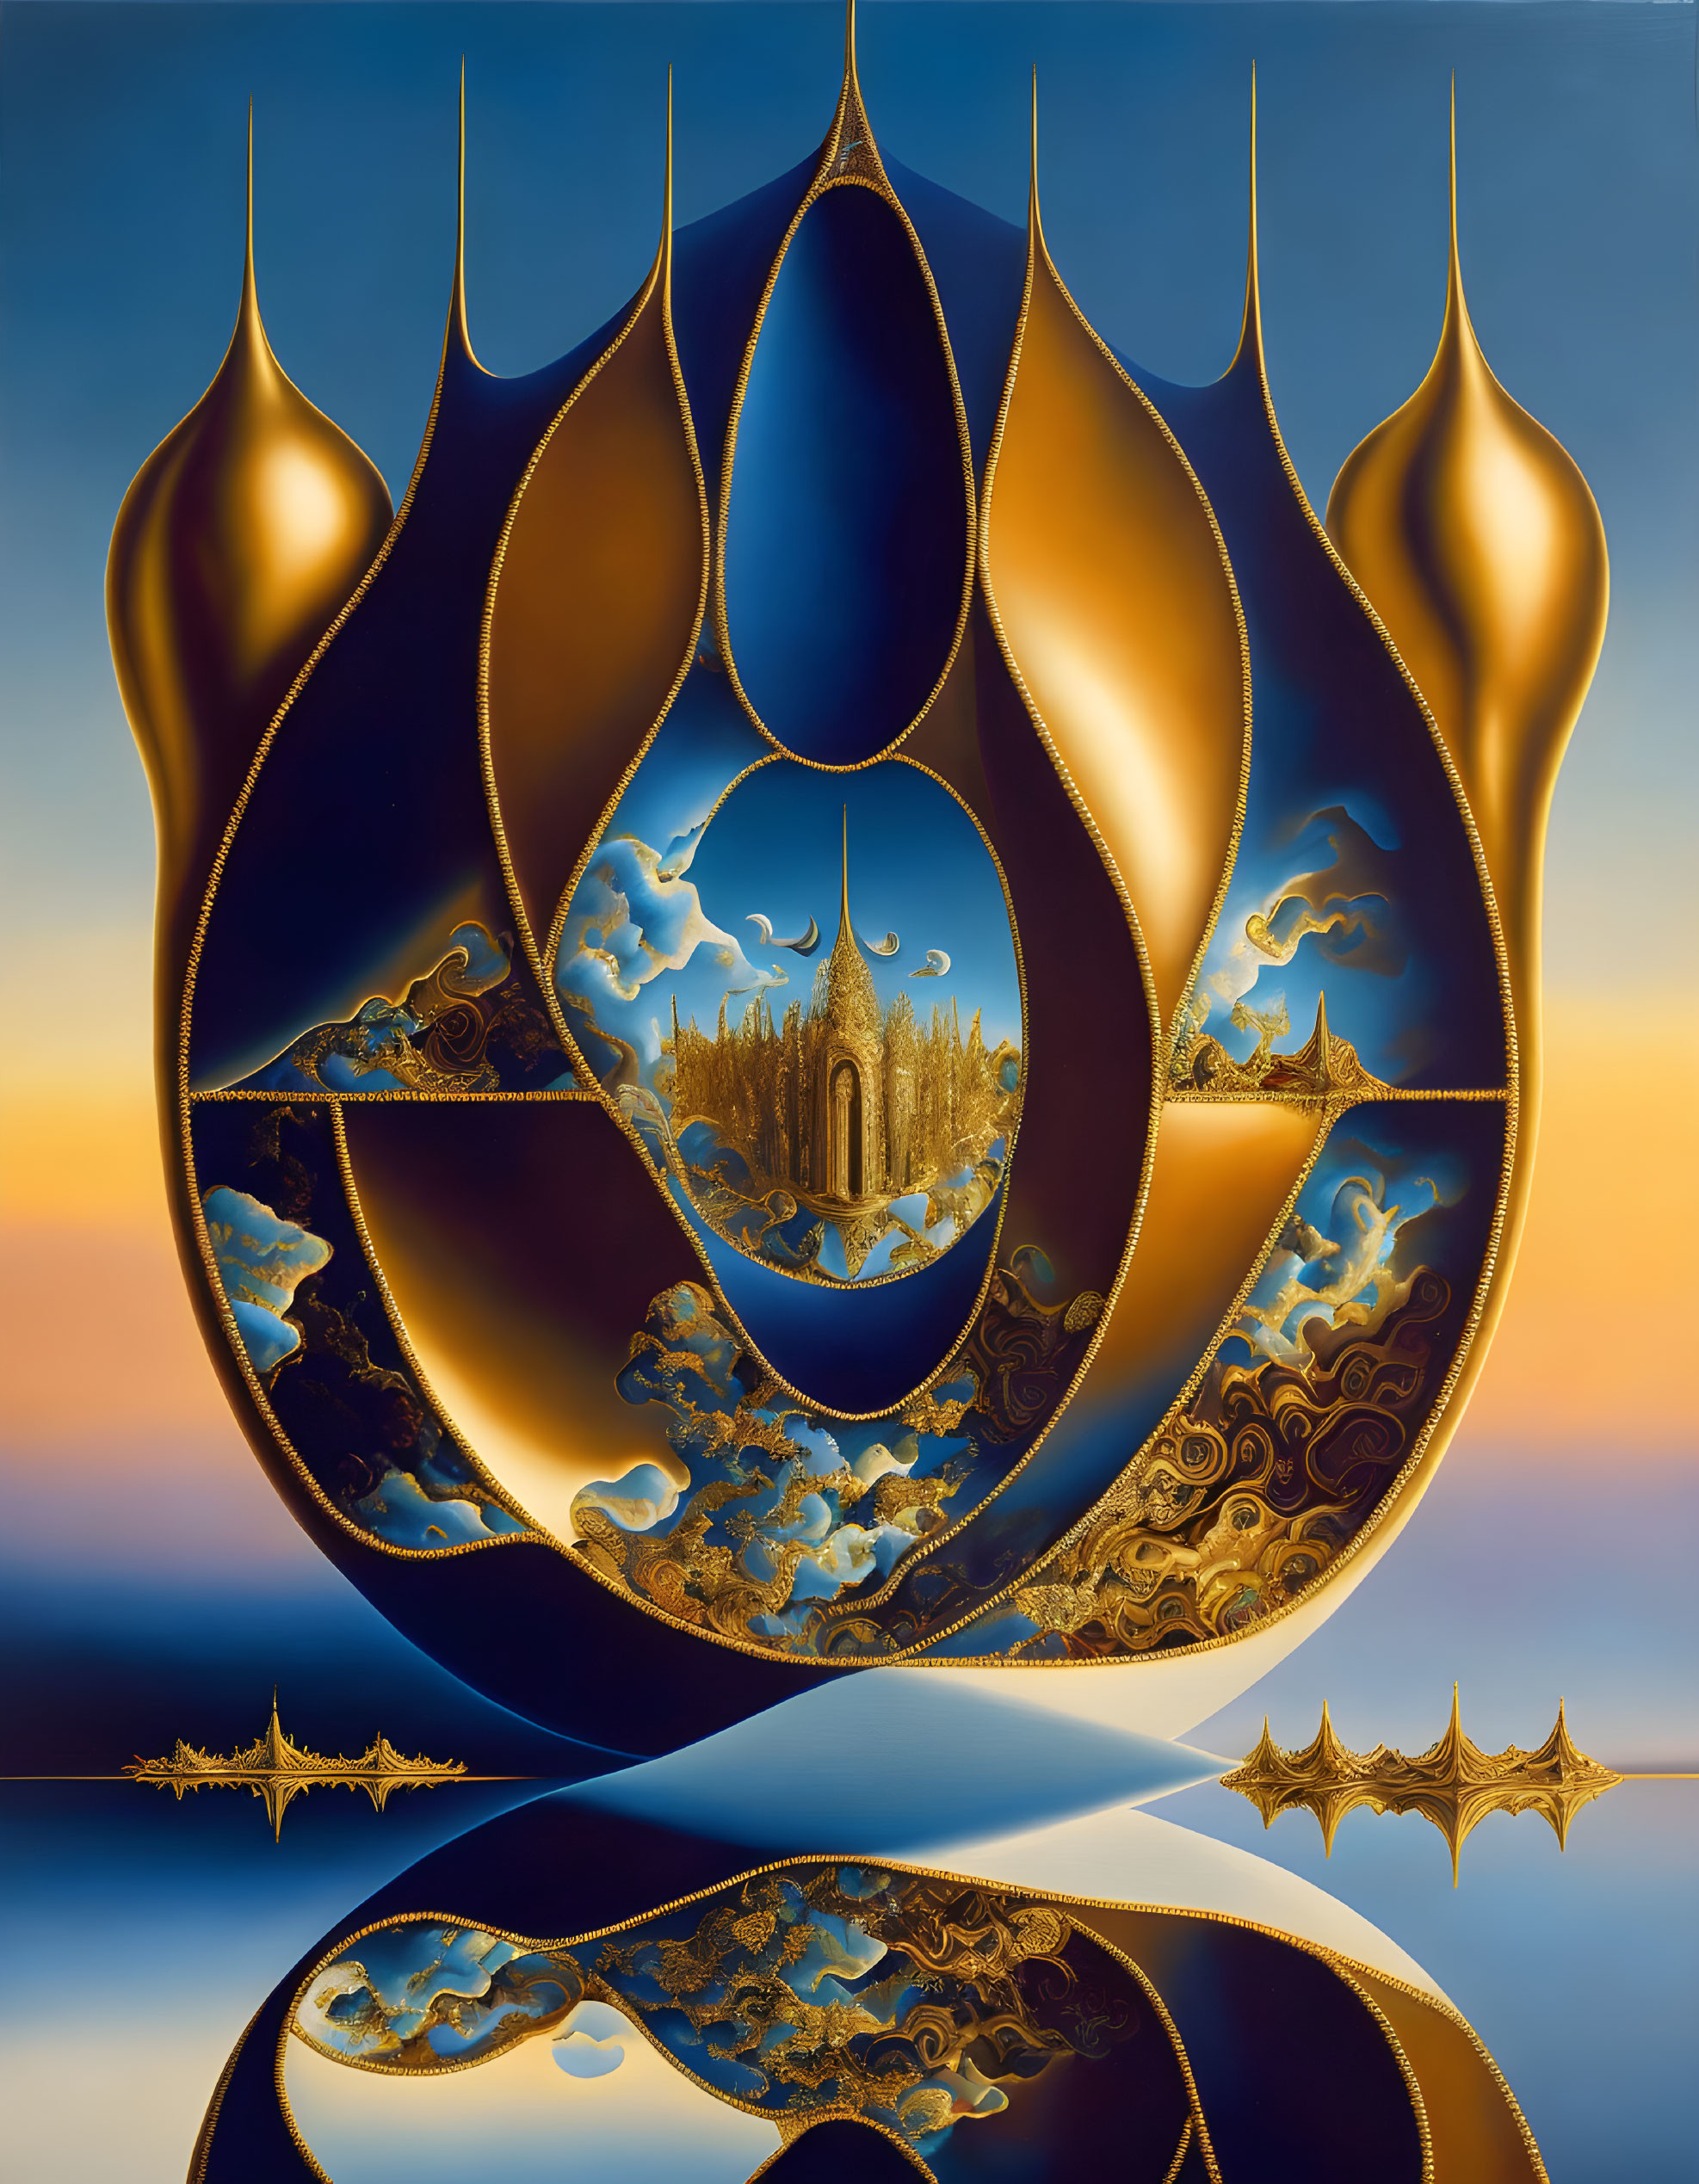 Surreal painting of golden teardrop structure with castle scenes on twilight sky.